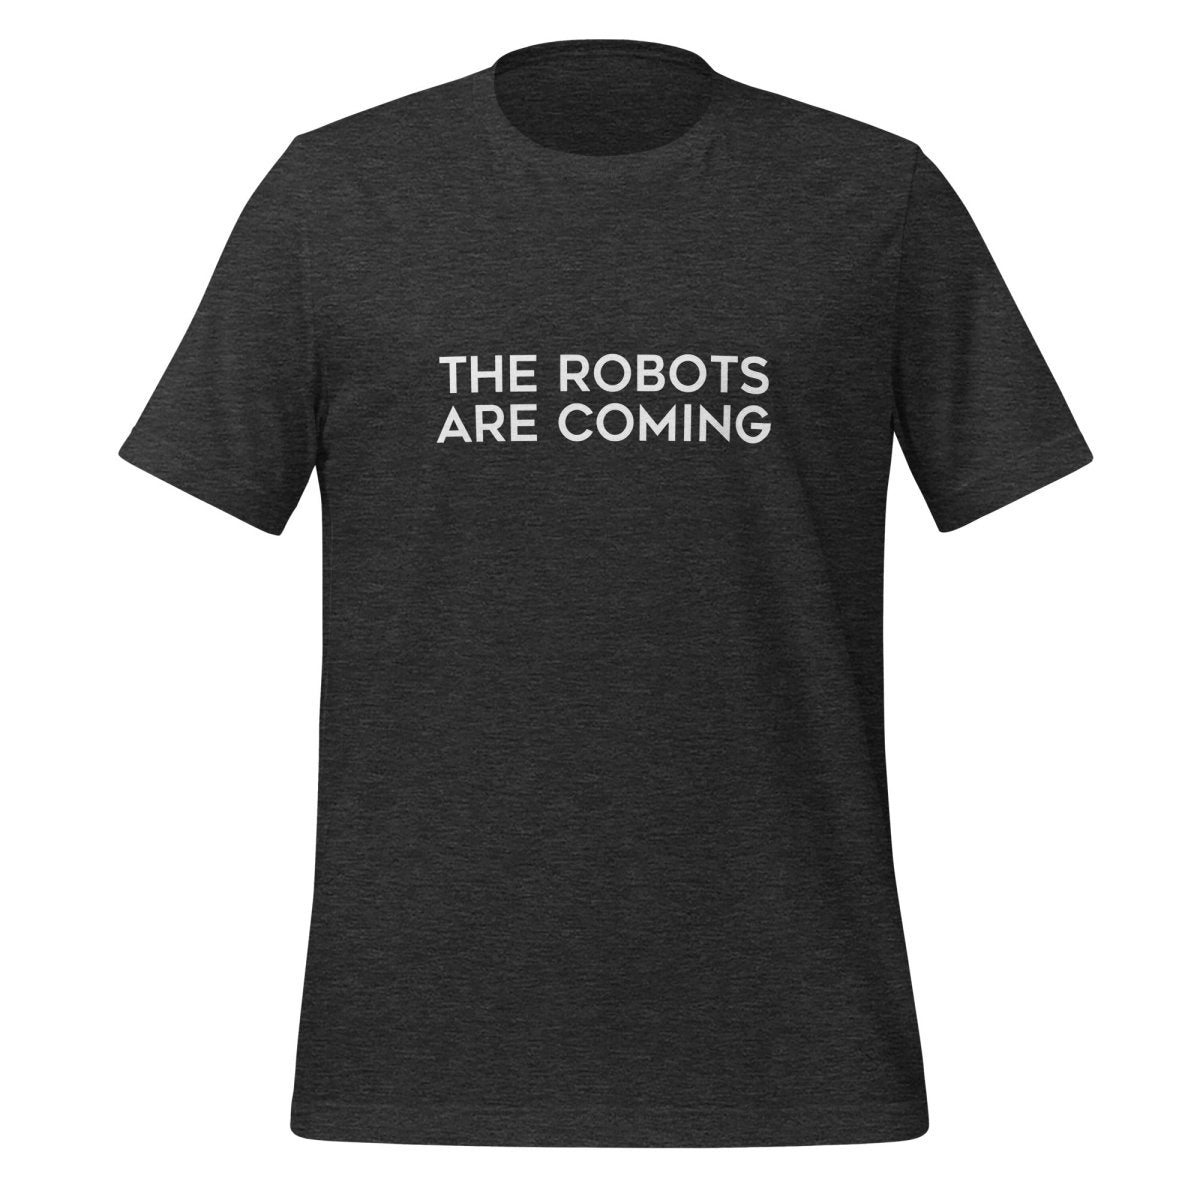 The Robots Are Coming T - Shirt 1 (unisex) - Dark Grey Heather - AI Store